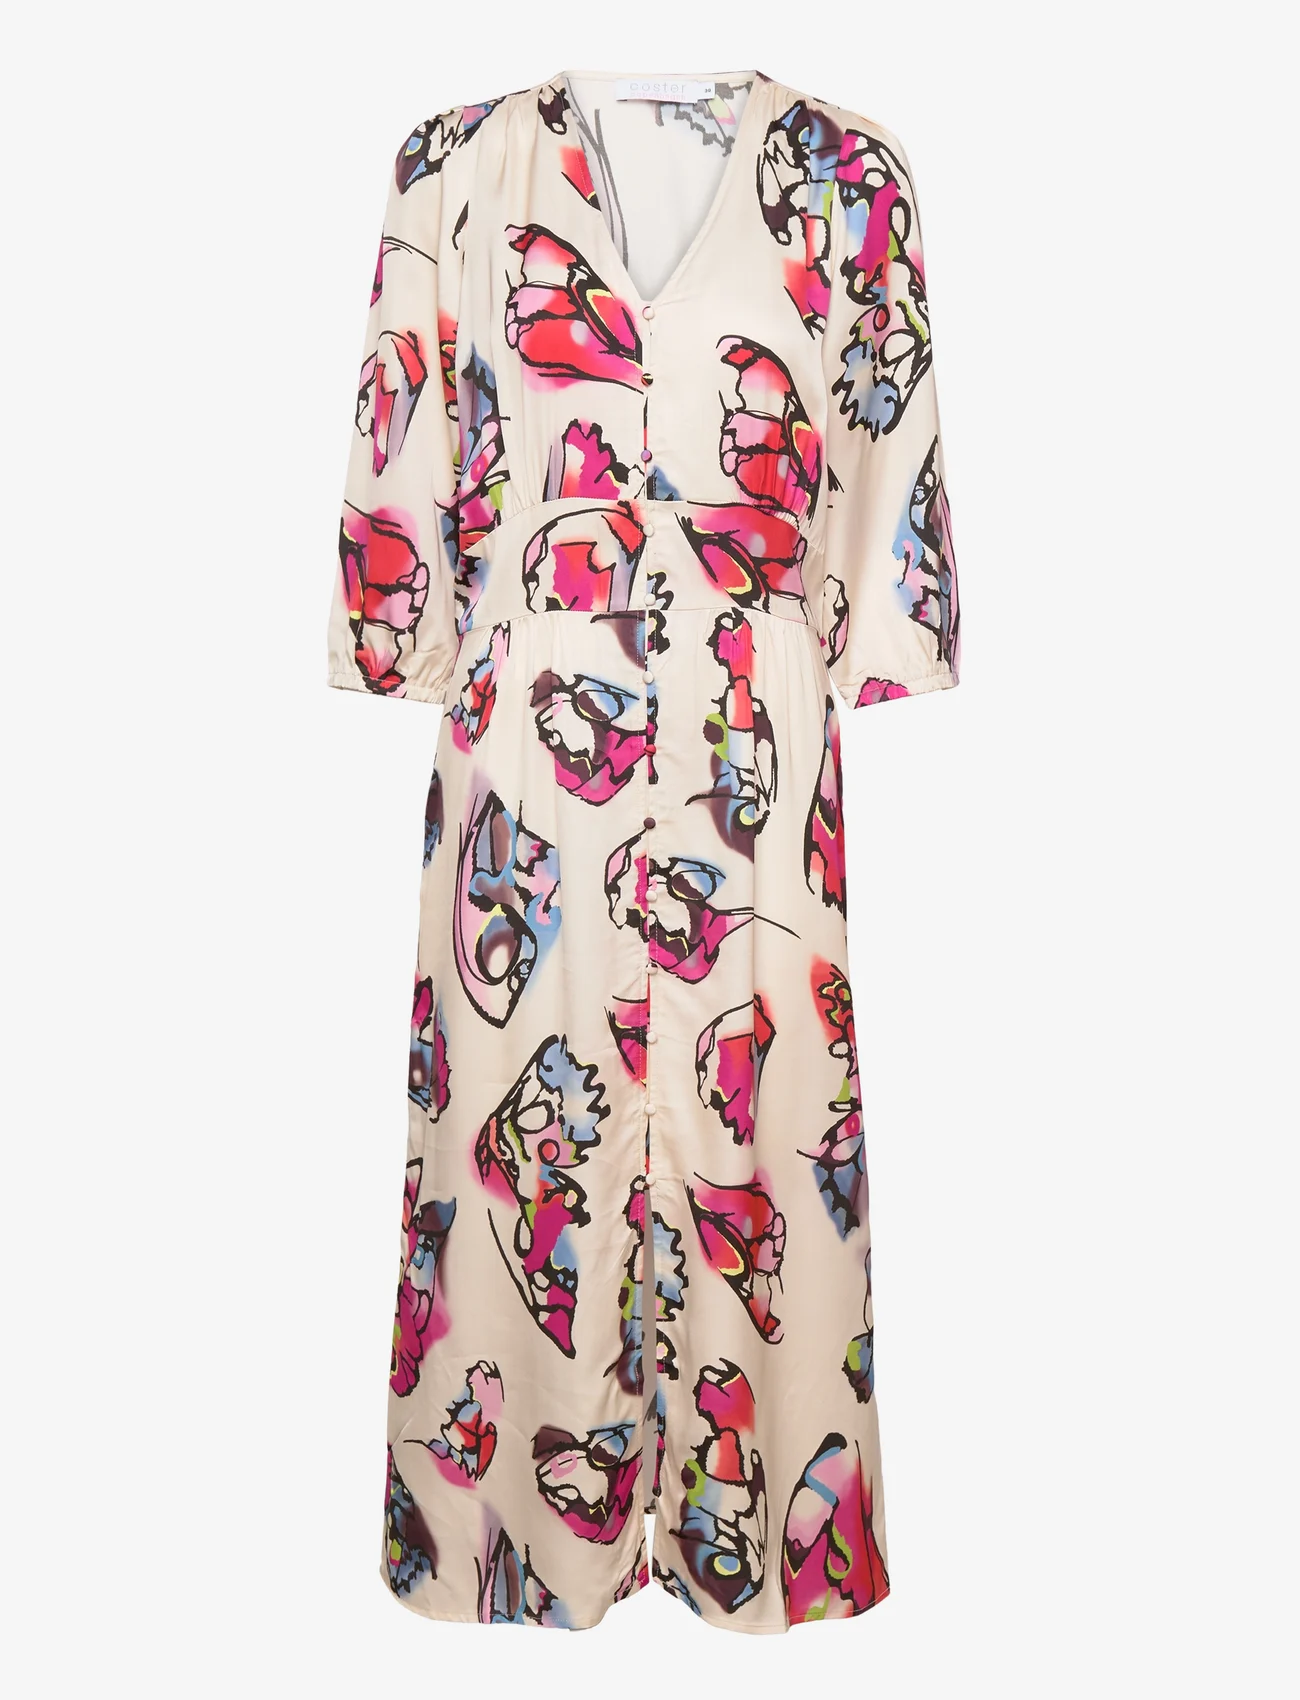 Coster Copenhagen - Dress with buttons in butterfly pri - maksikleidid - butterfly print - 0